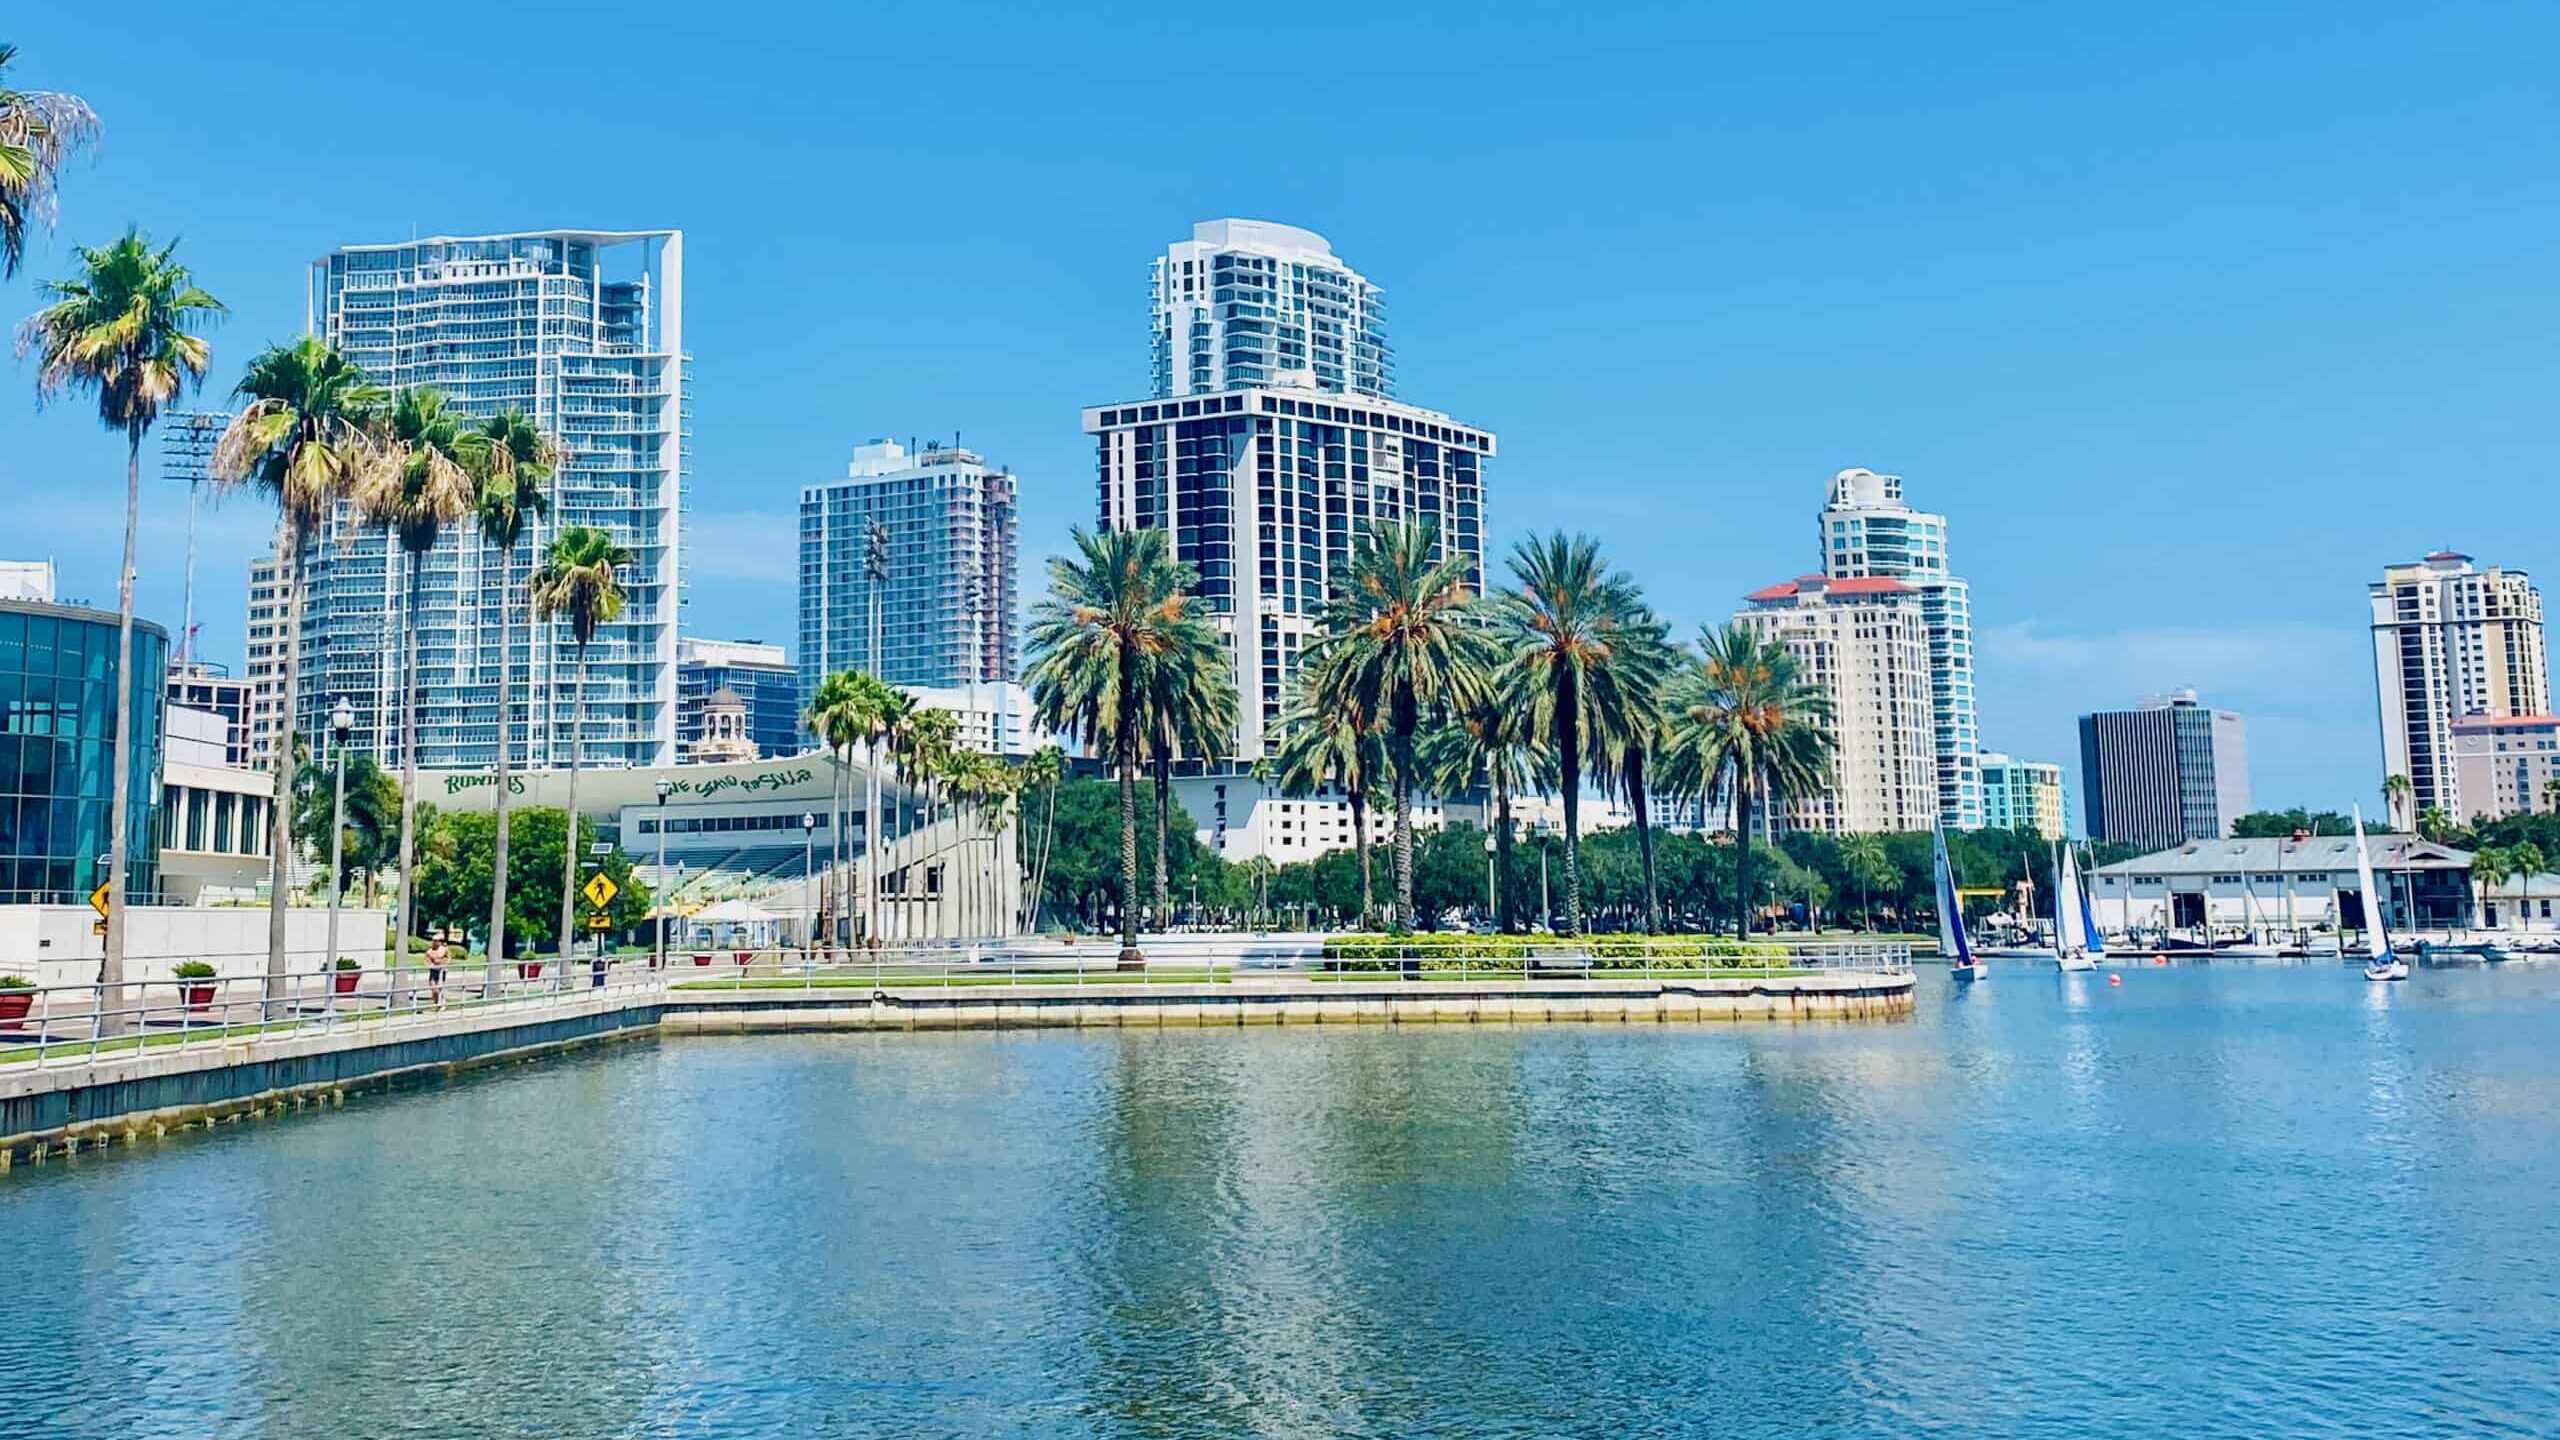 best things to do in st petersburg fl is to see these views of downtown. Located next to Alfred Whitted Park you'll see sailboats and park views of the water.